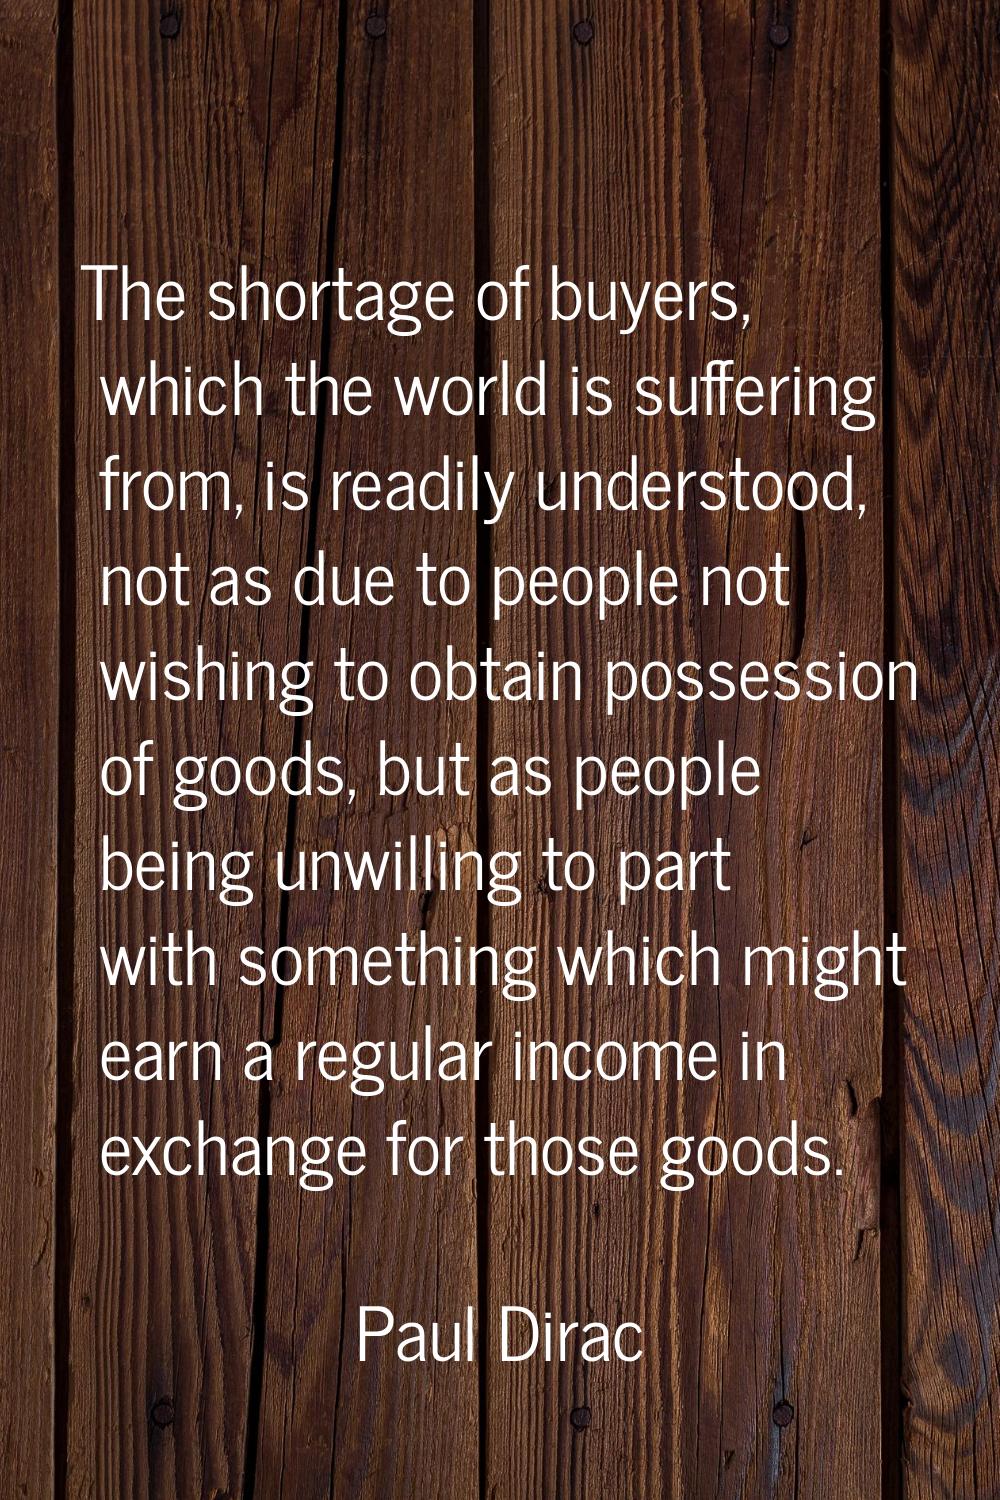 The shortage of buyers, which the world is suffering from, is readily understood, not as due to peo